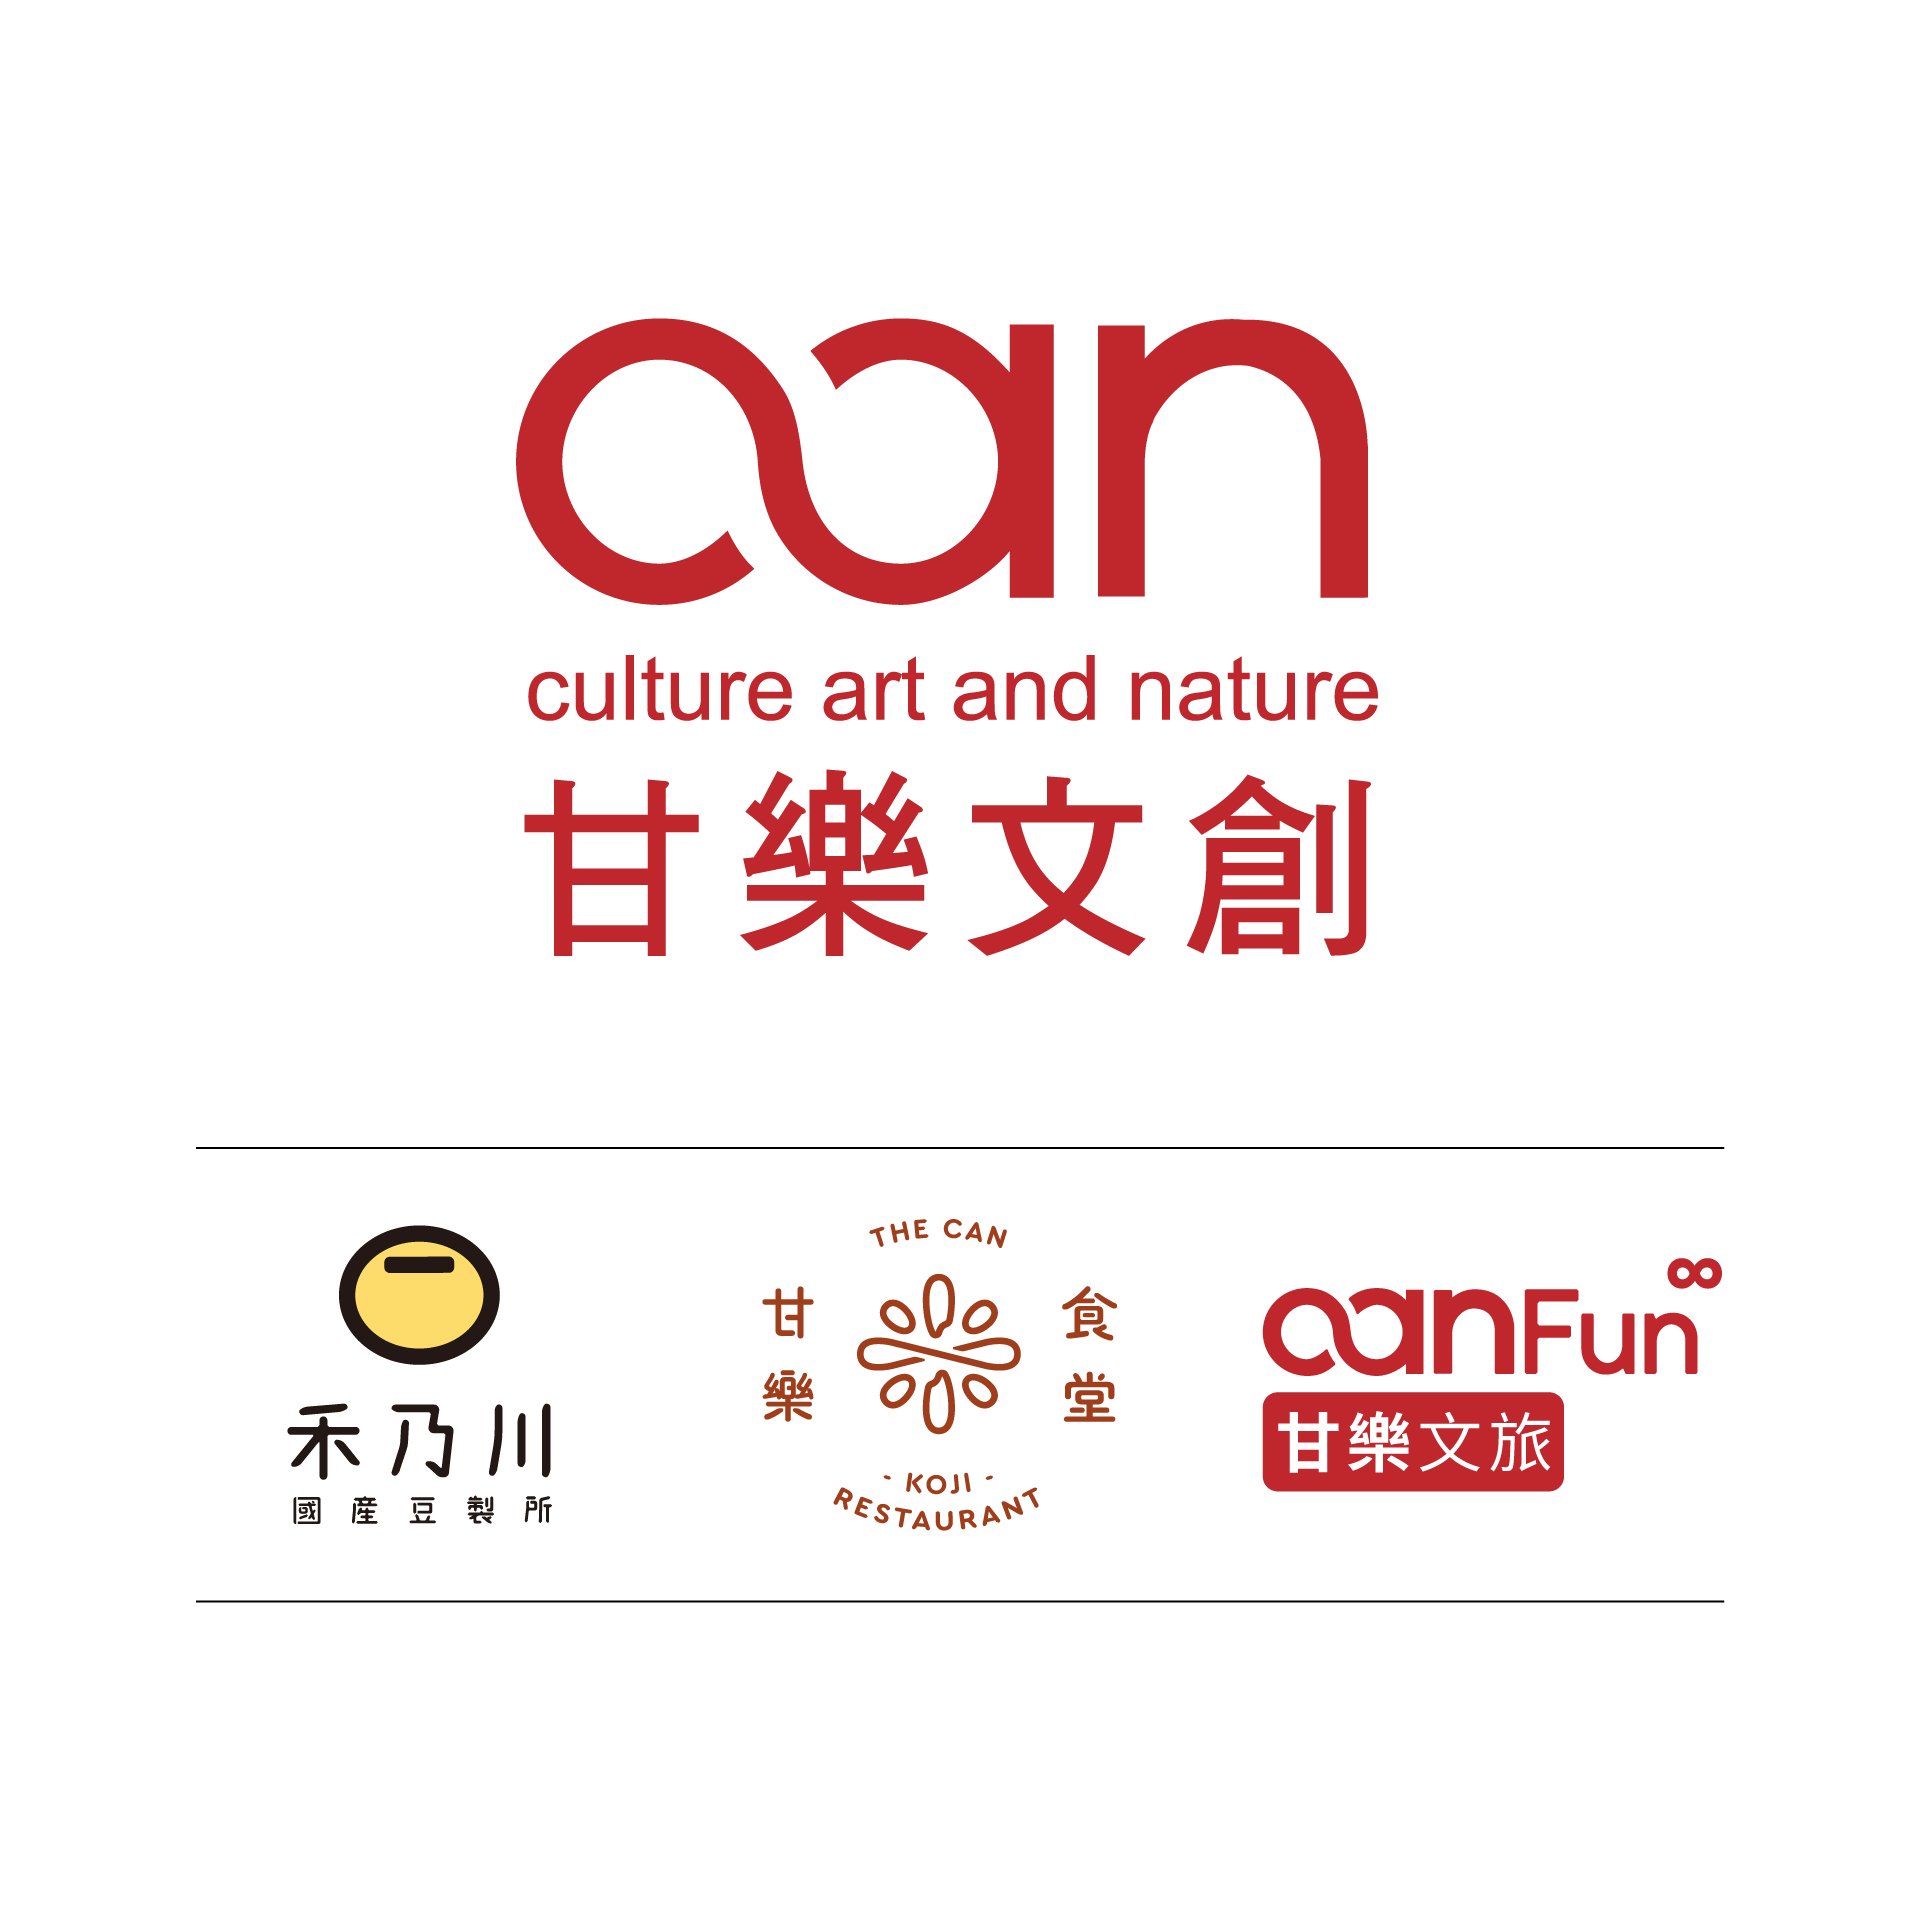 Culture, Art and Nature (CAN) - Certified B Corporation in Taiwan